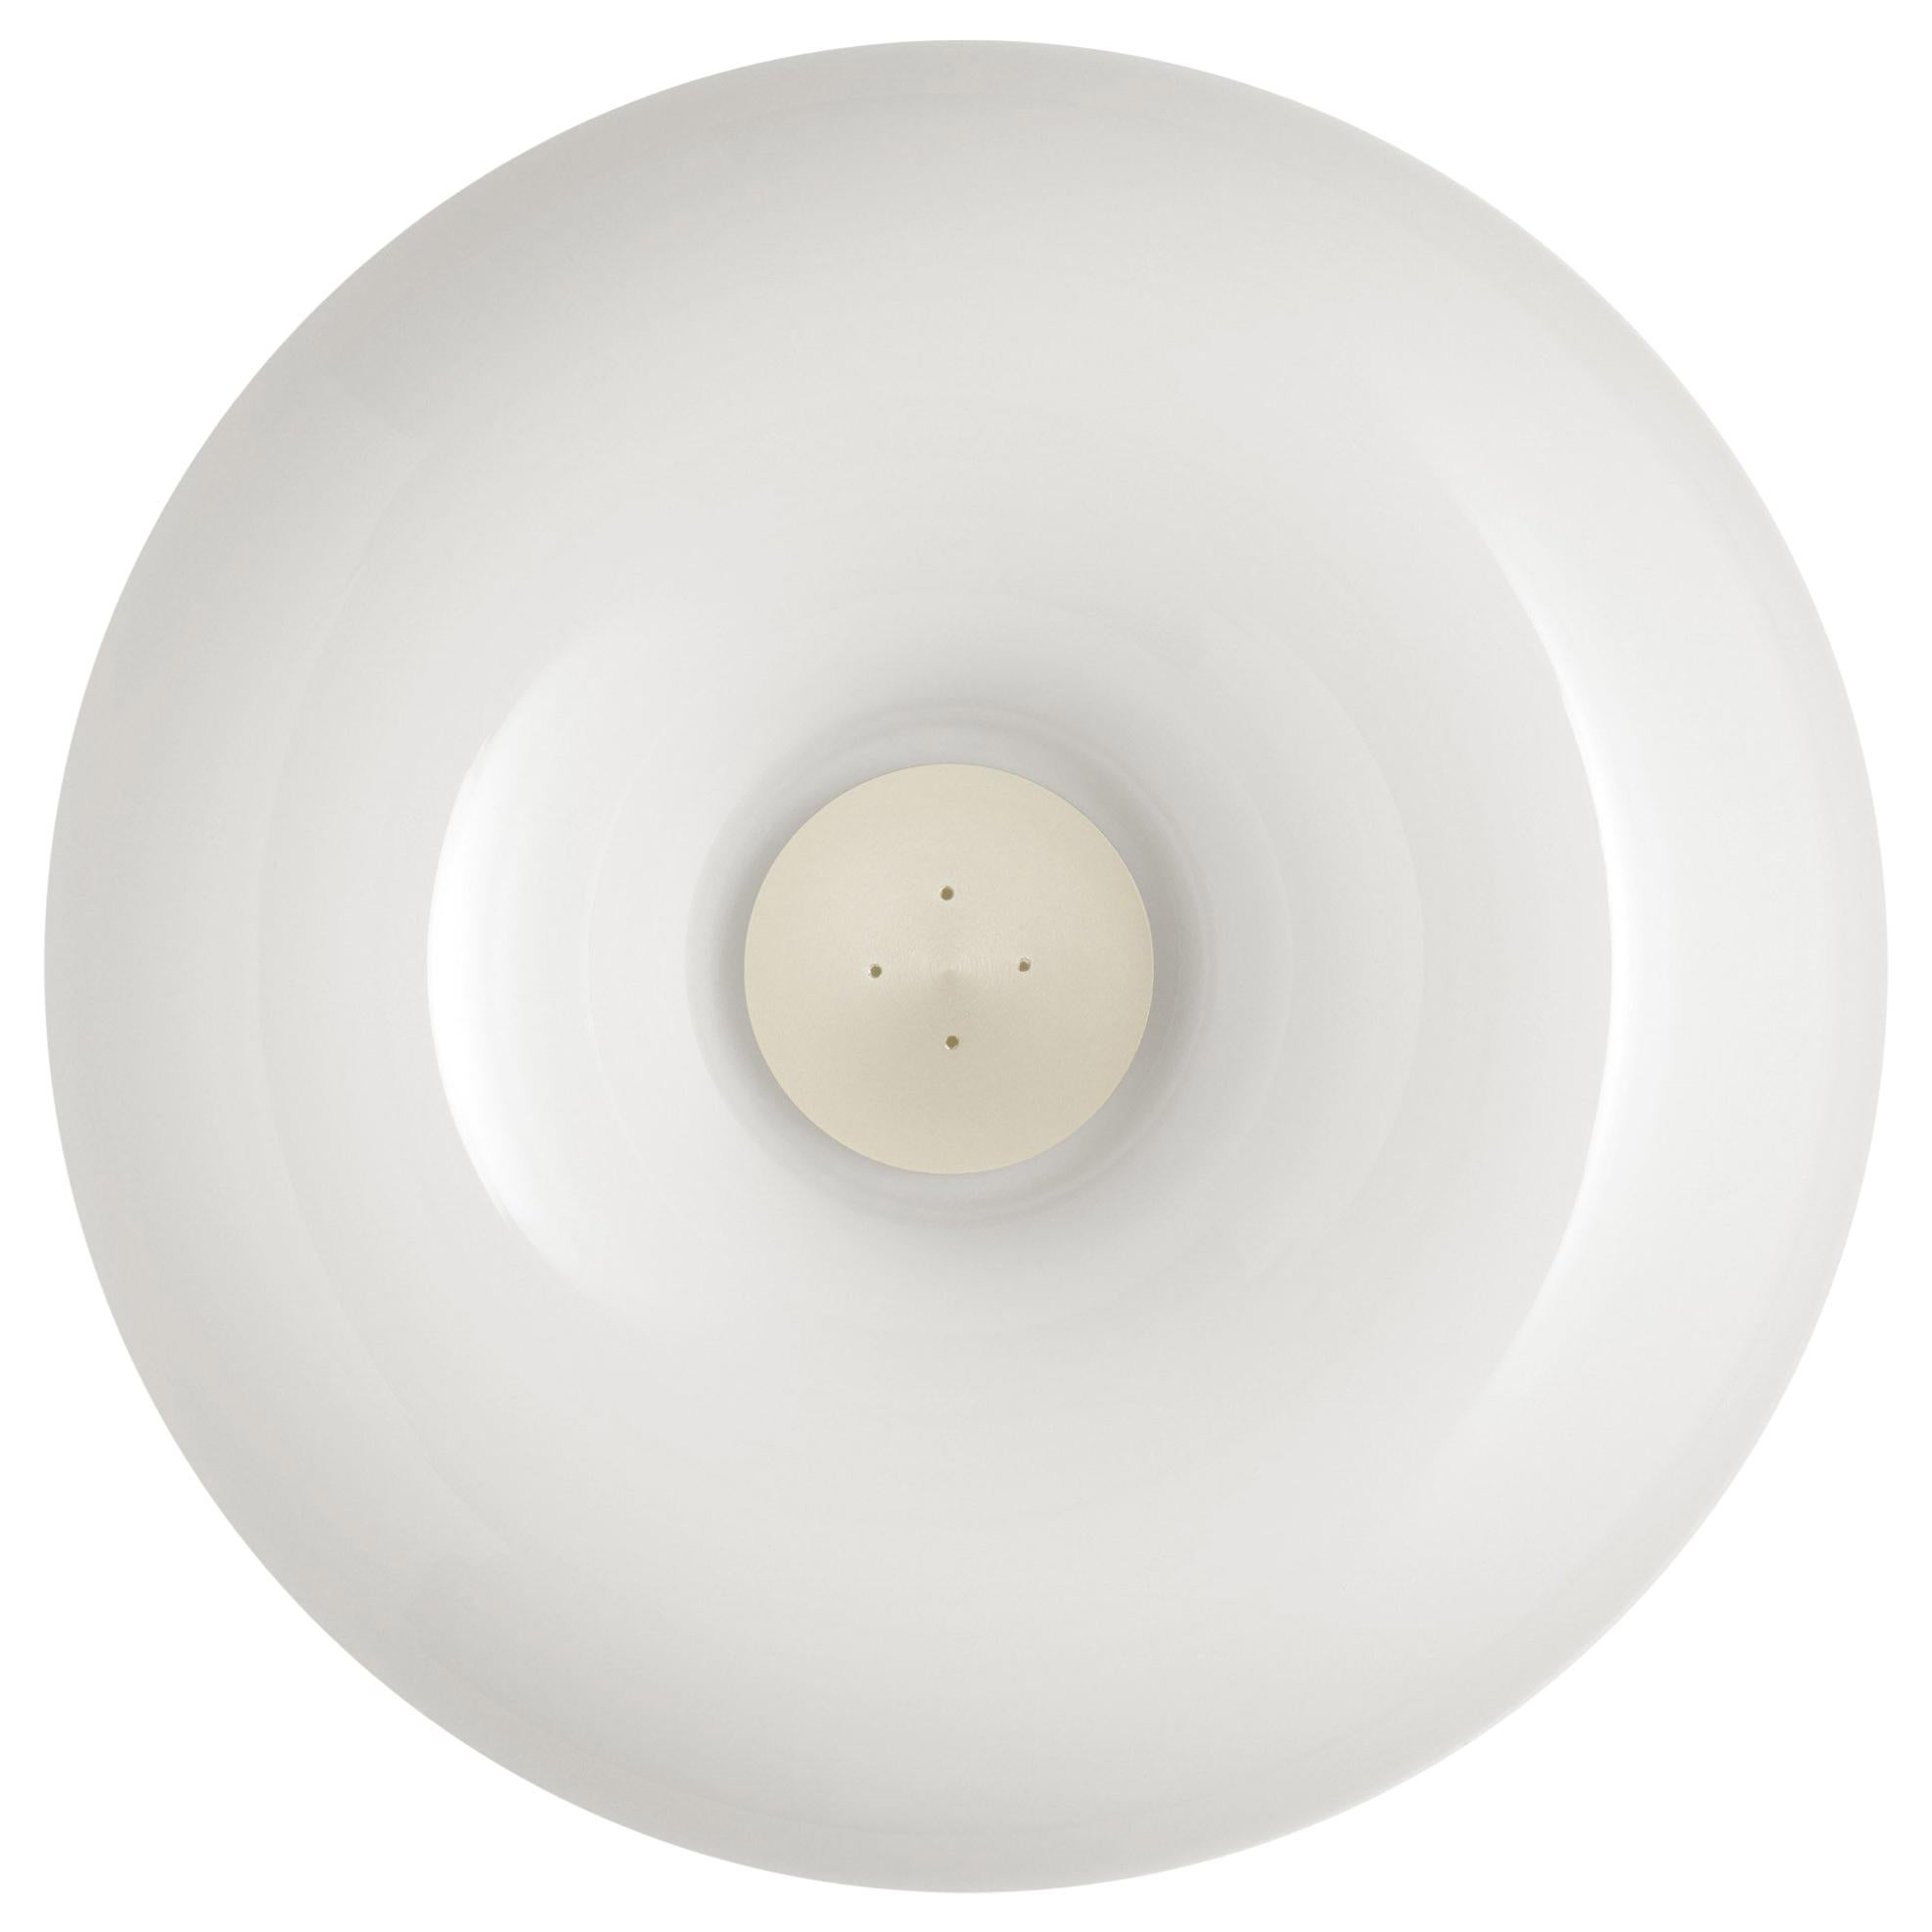 Foscarini Circus Small Wall Lamp in White by Defne Koz For Sale